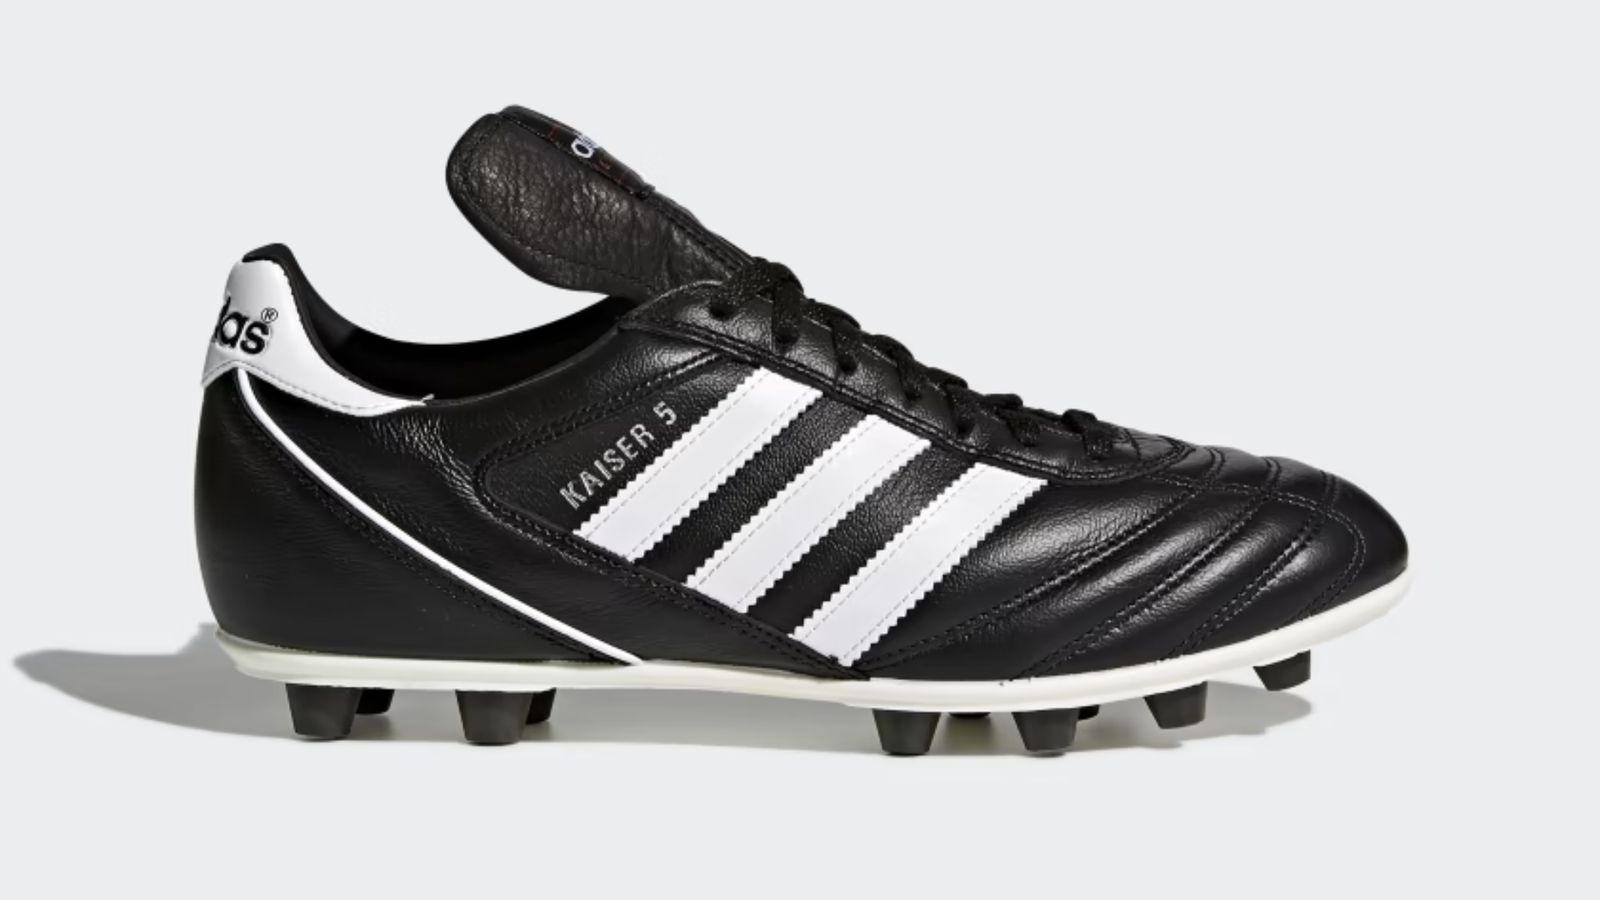 adidas Kaiser 5 Liga product image of a black football boot with white accents, including three white stripes across the side.